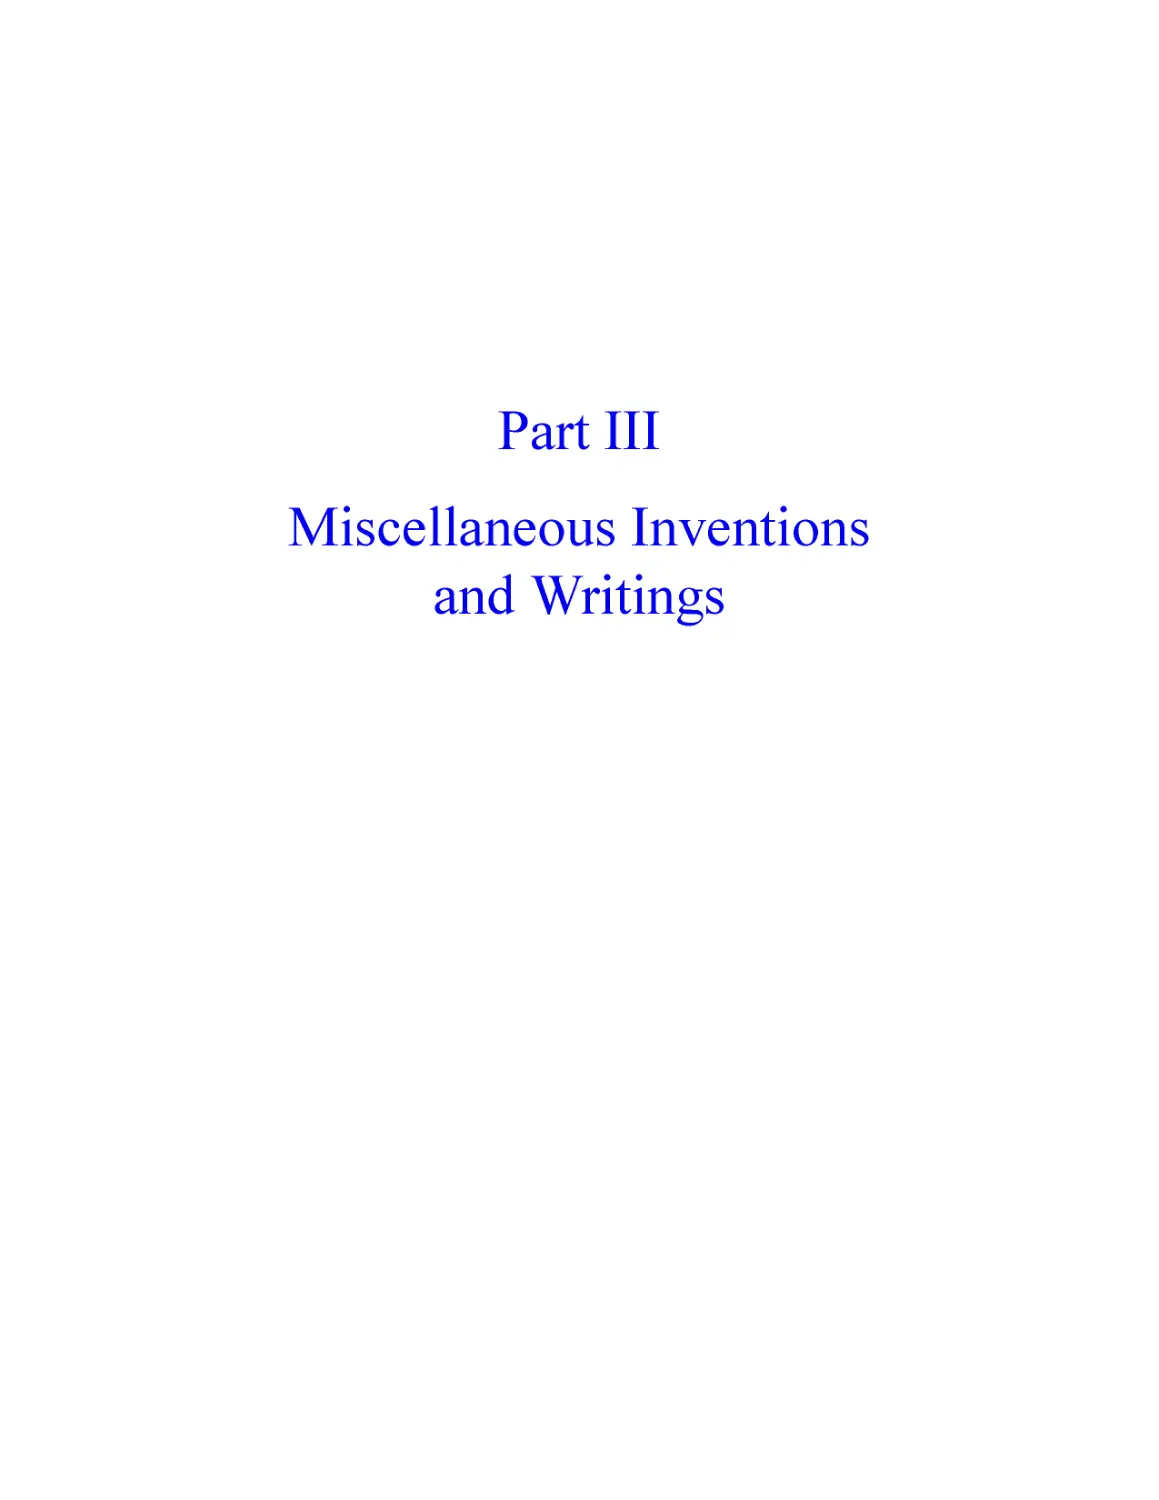 ﻿Part III: Miscellaneous Inventions and Writing